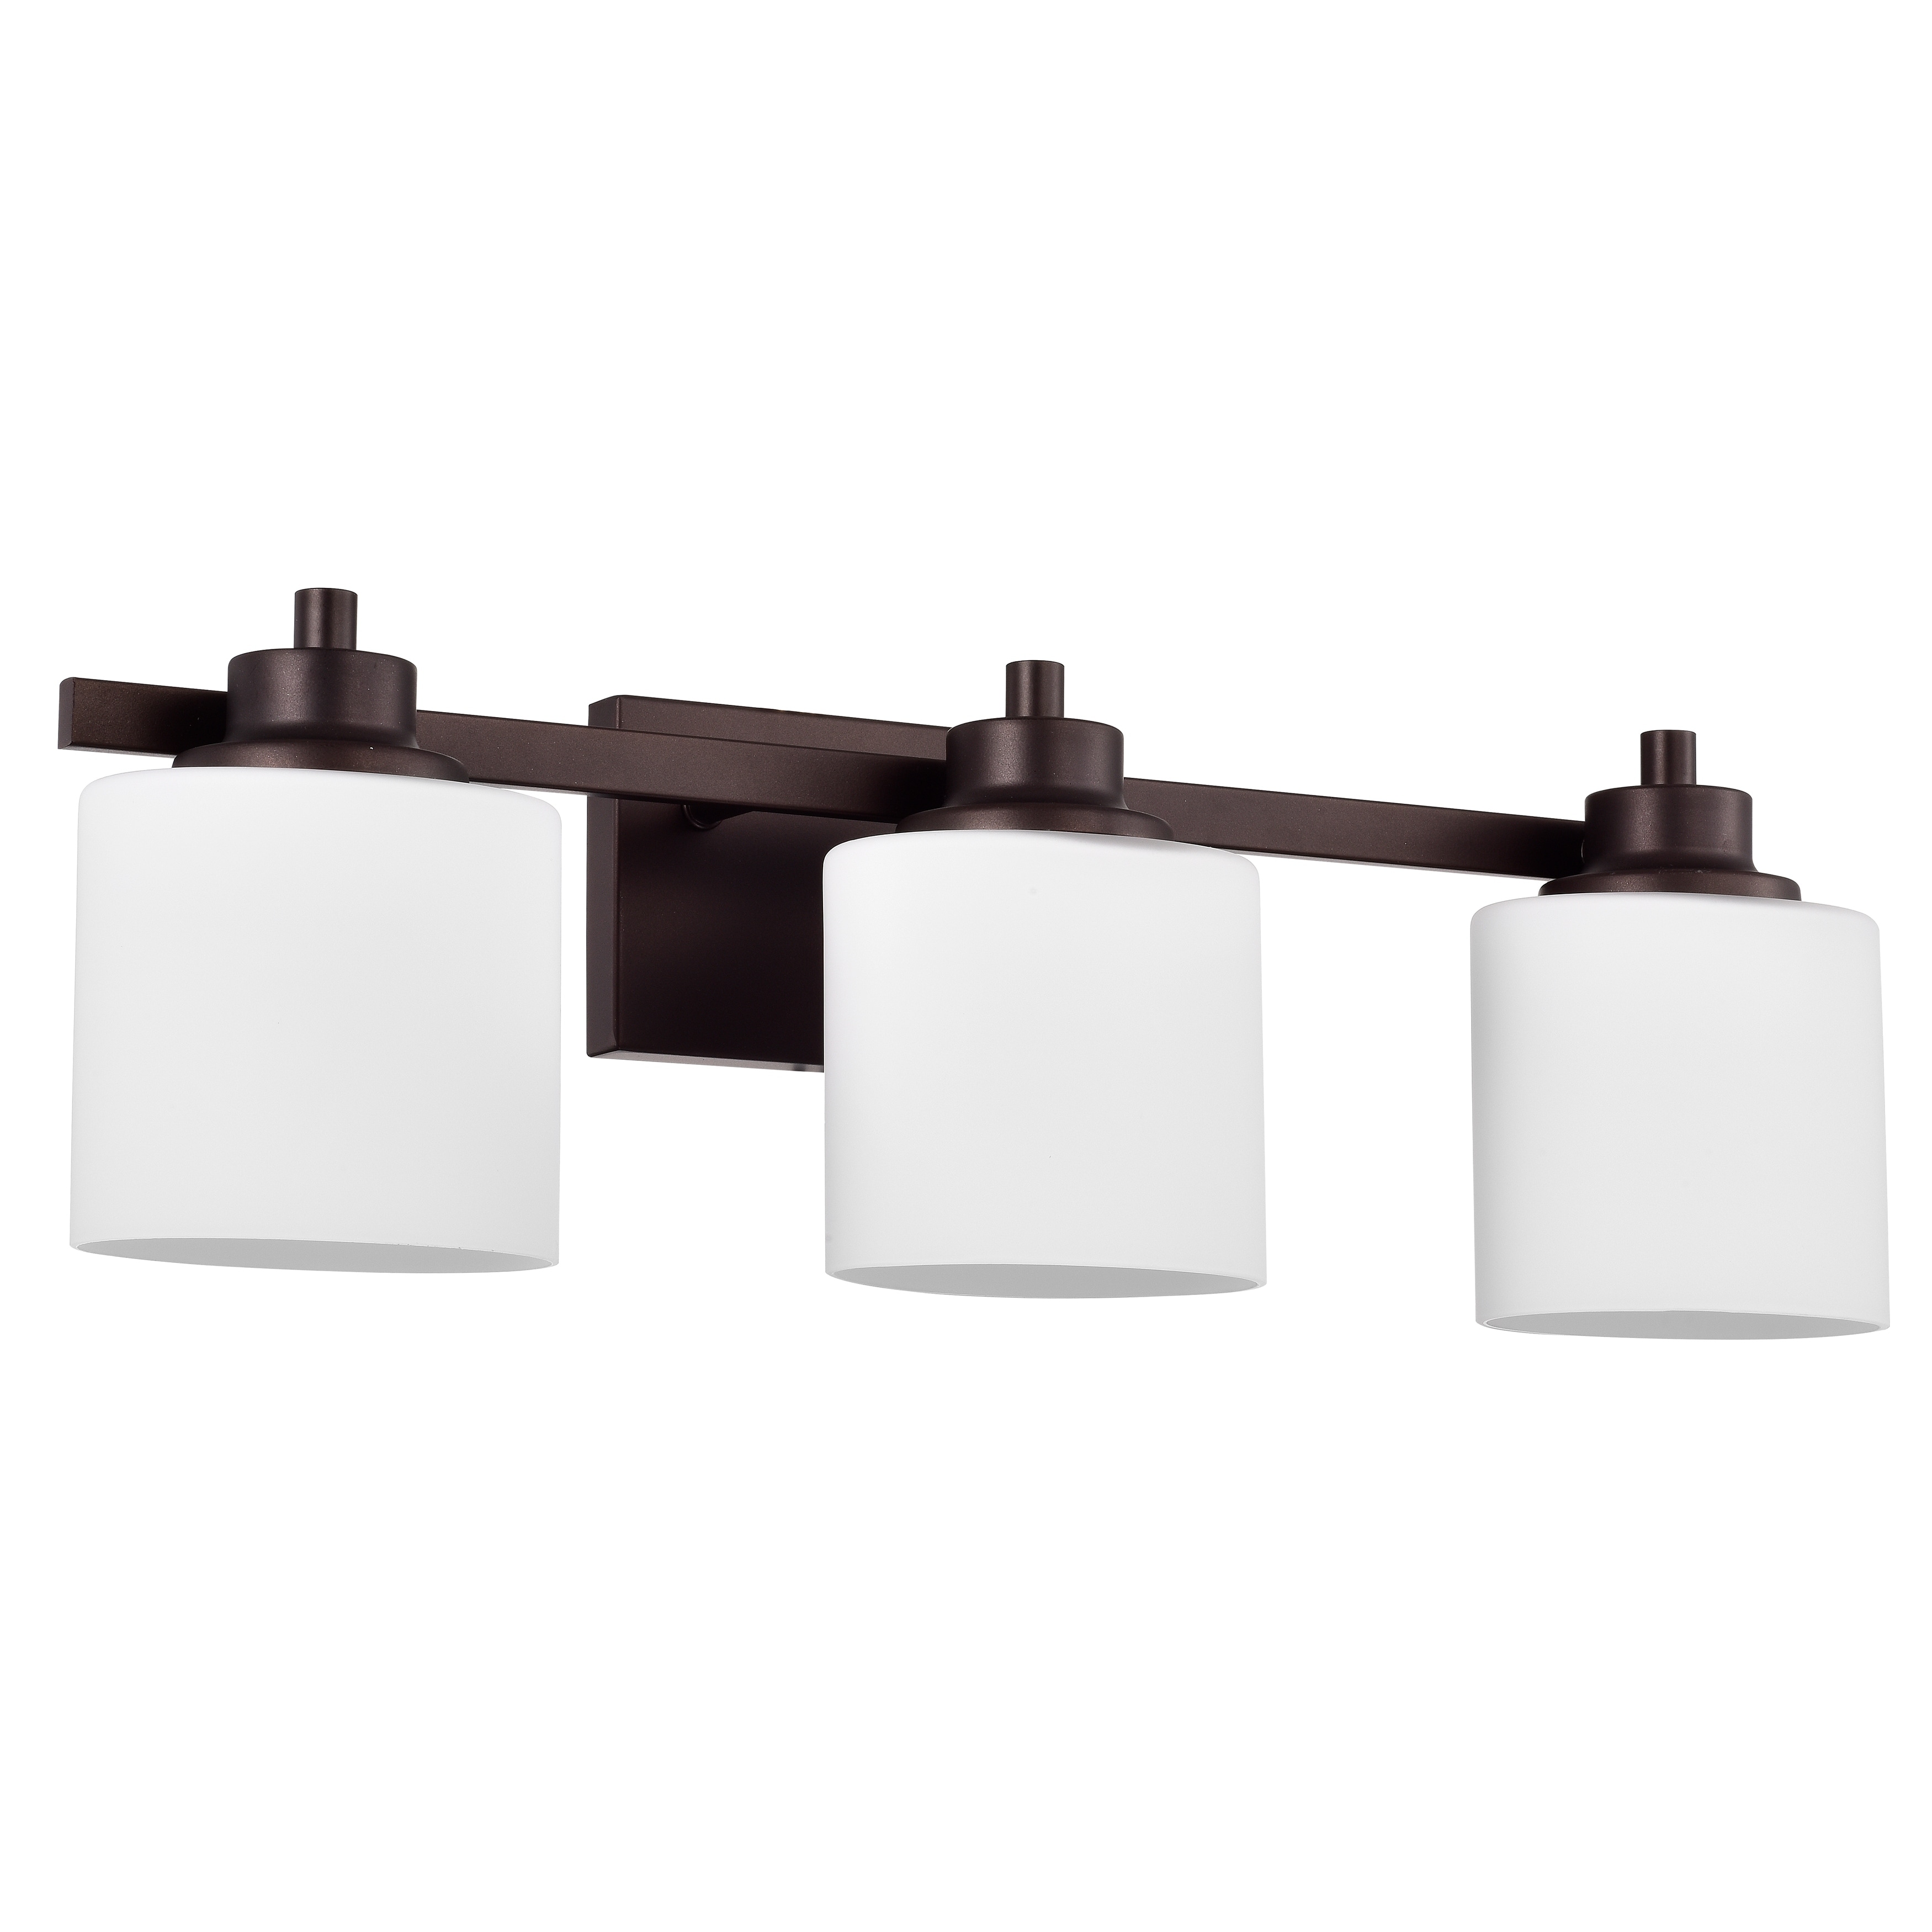 Oil Rubbed Bronze 3 Light Vanity Light with Built-in Grounded Receptacle Outlet 